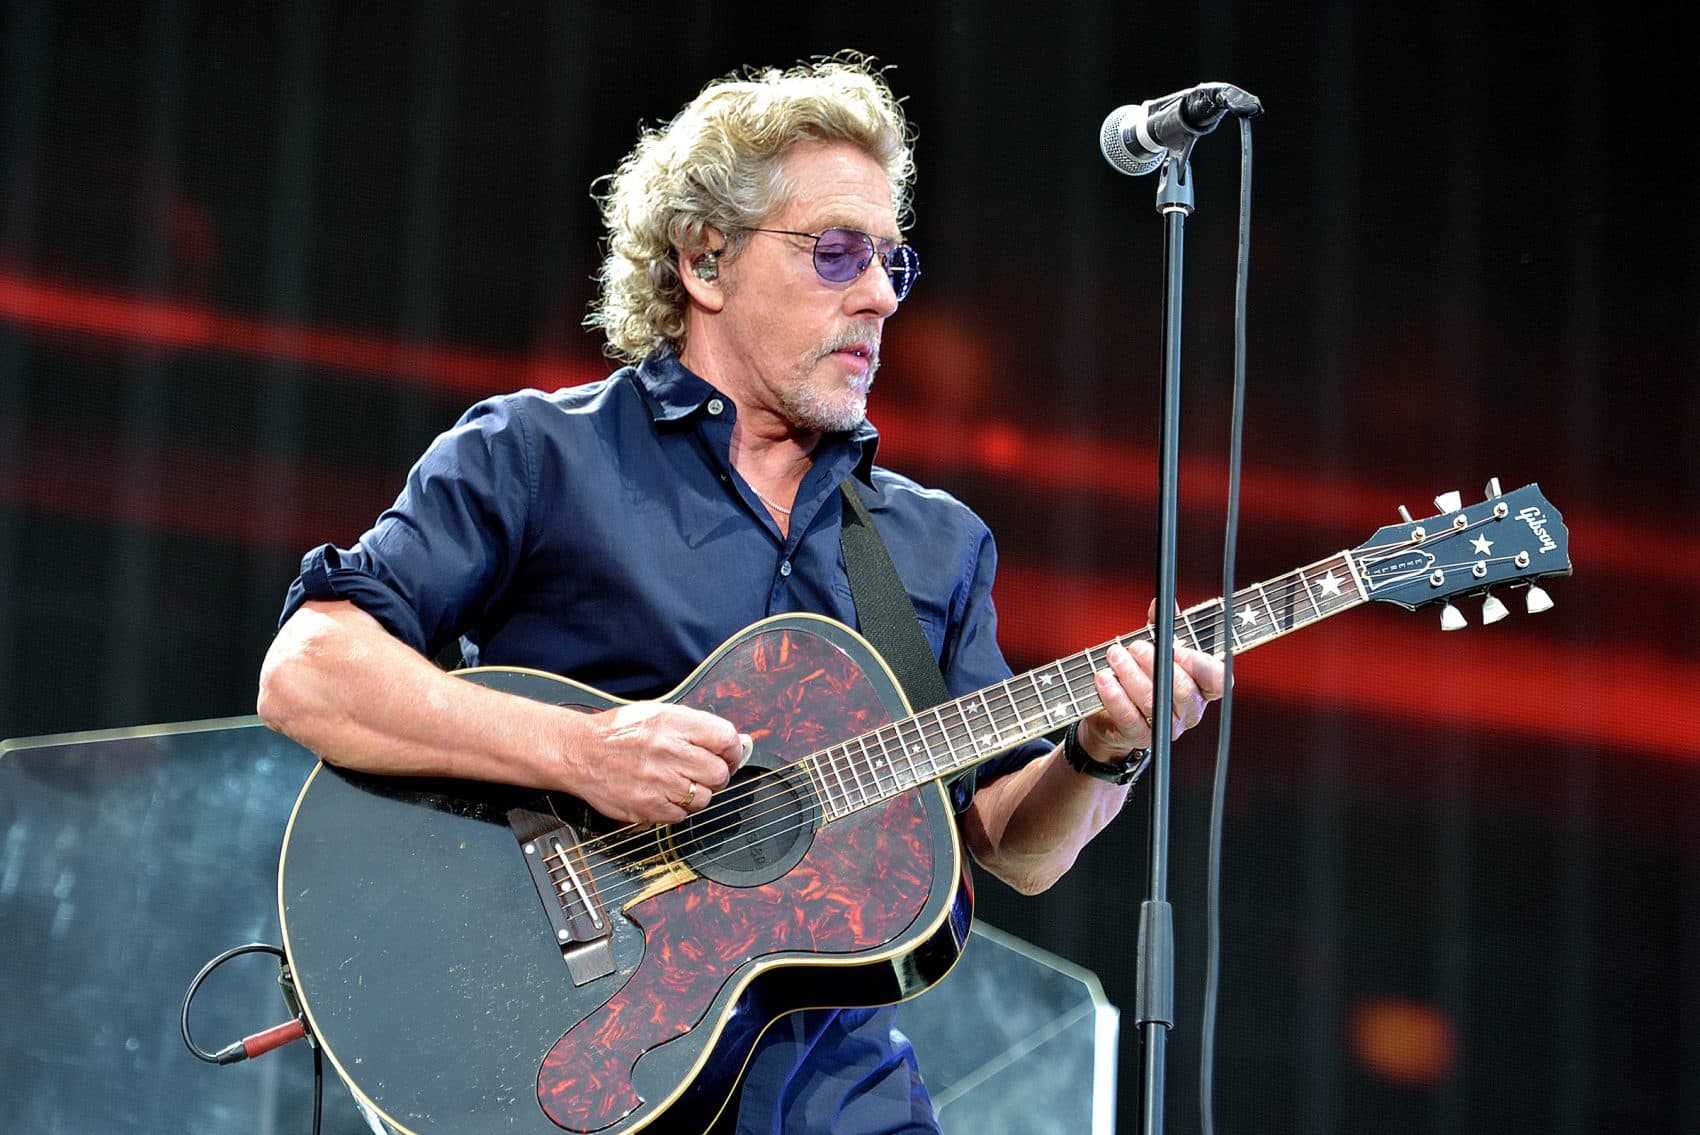 Roger Daltry will be performing The Who's &quot;Tommy&quot; at Tanglewood. (Courtesy Fabrice Demessence)